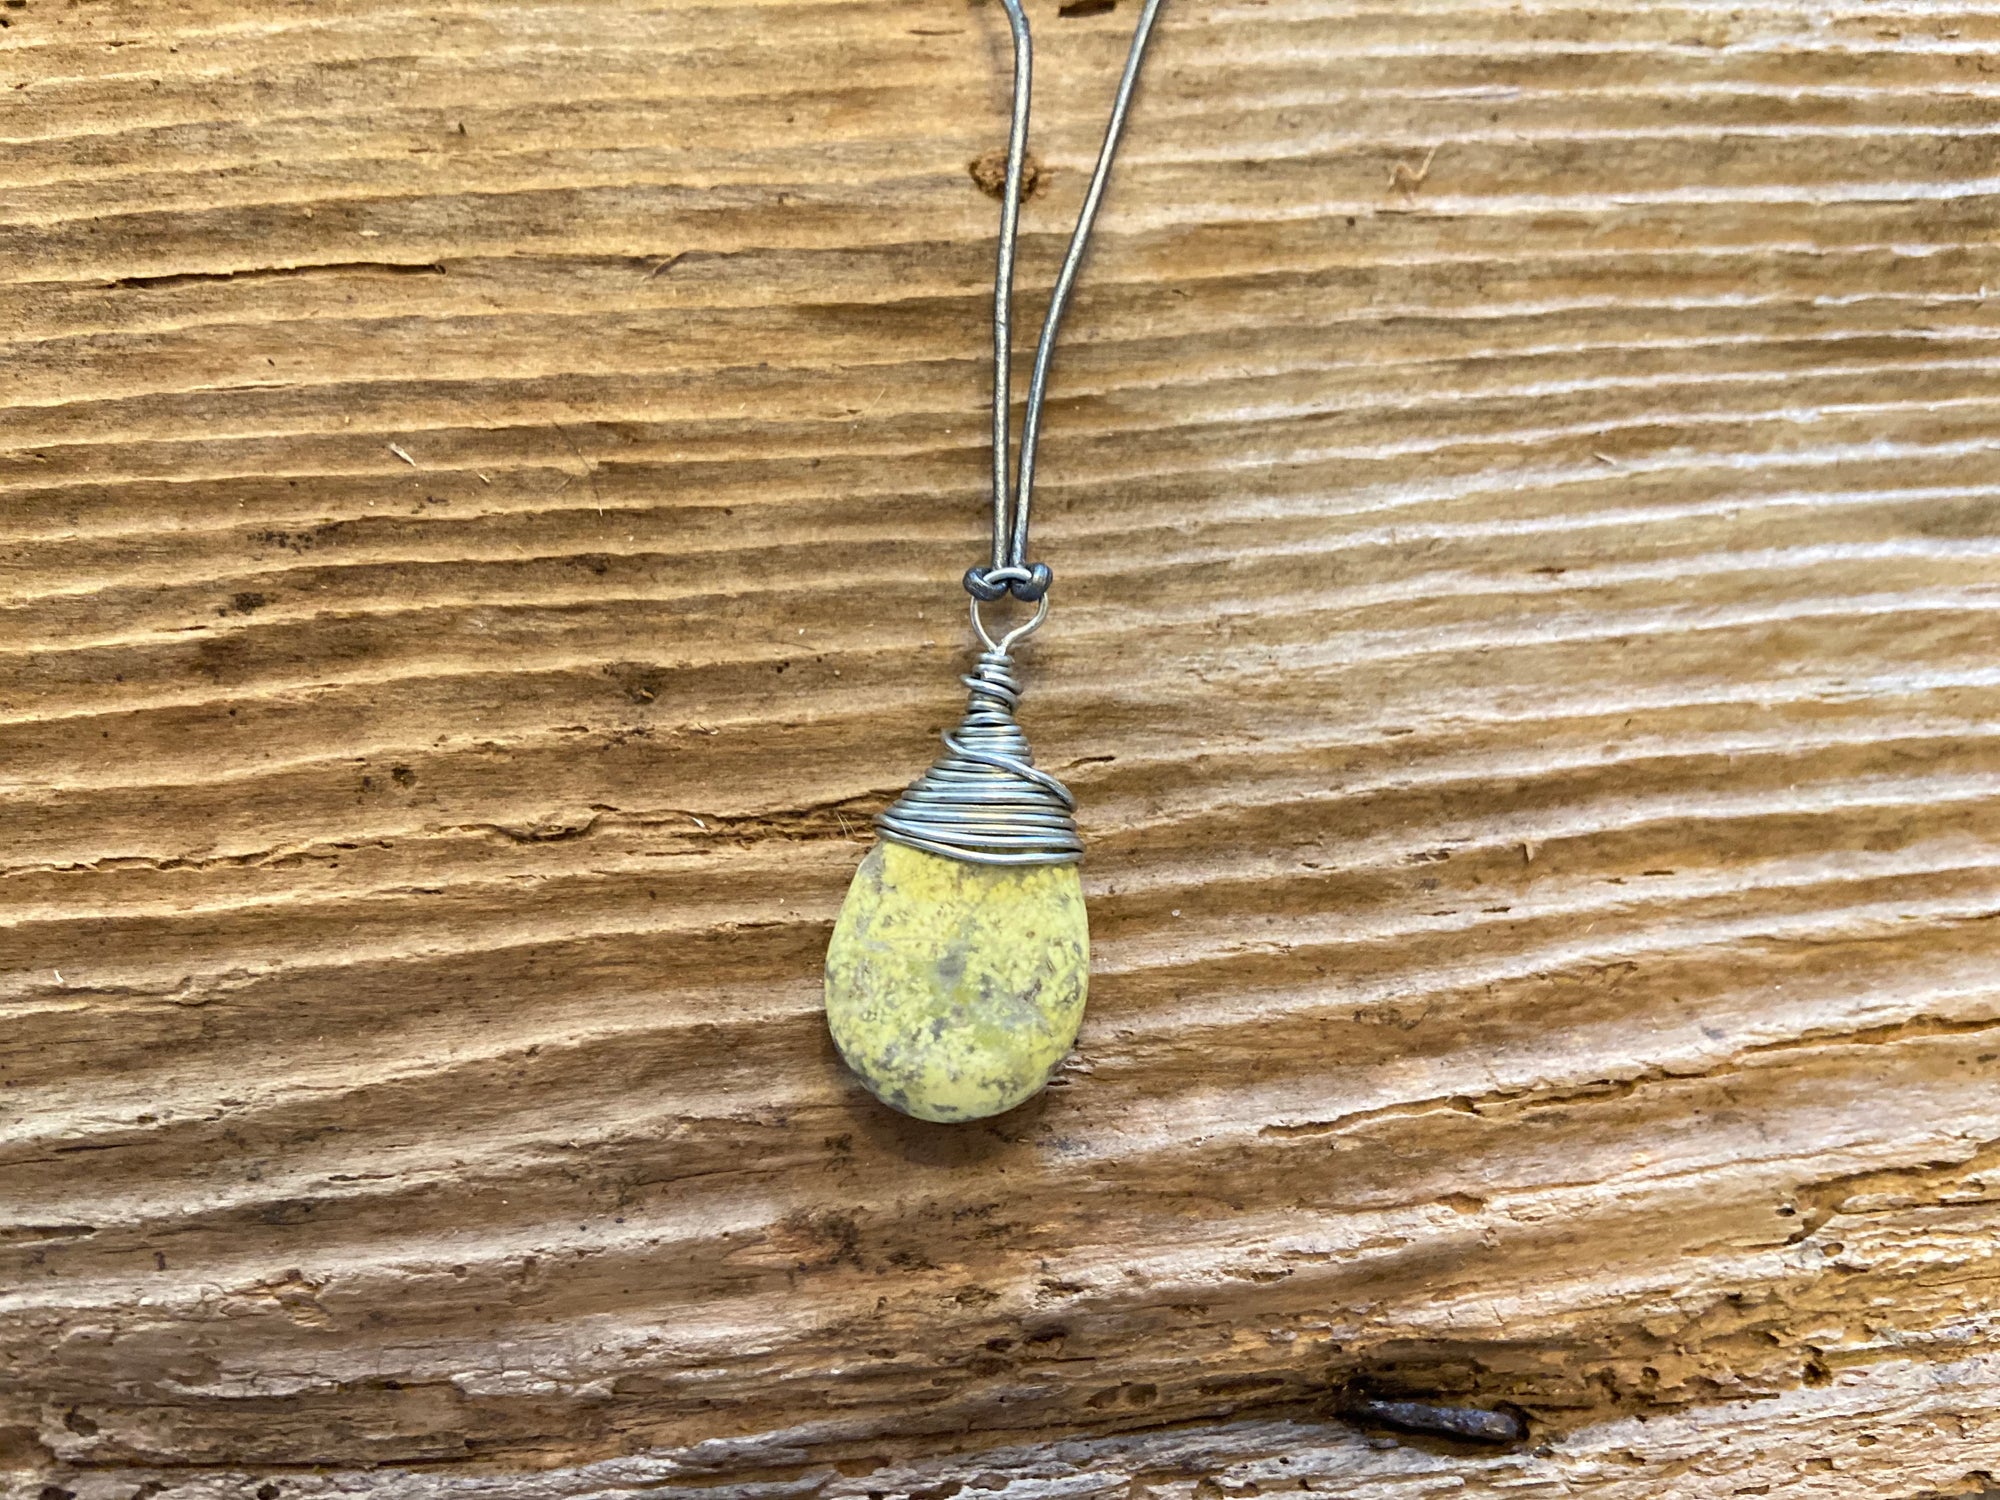 B. Light Necklace Polished Pale Yellow Stone wrapped in Silver Wire on Gray Leather Cord